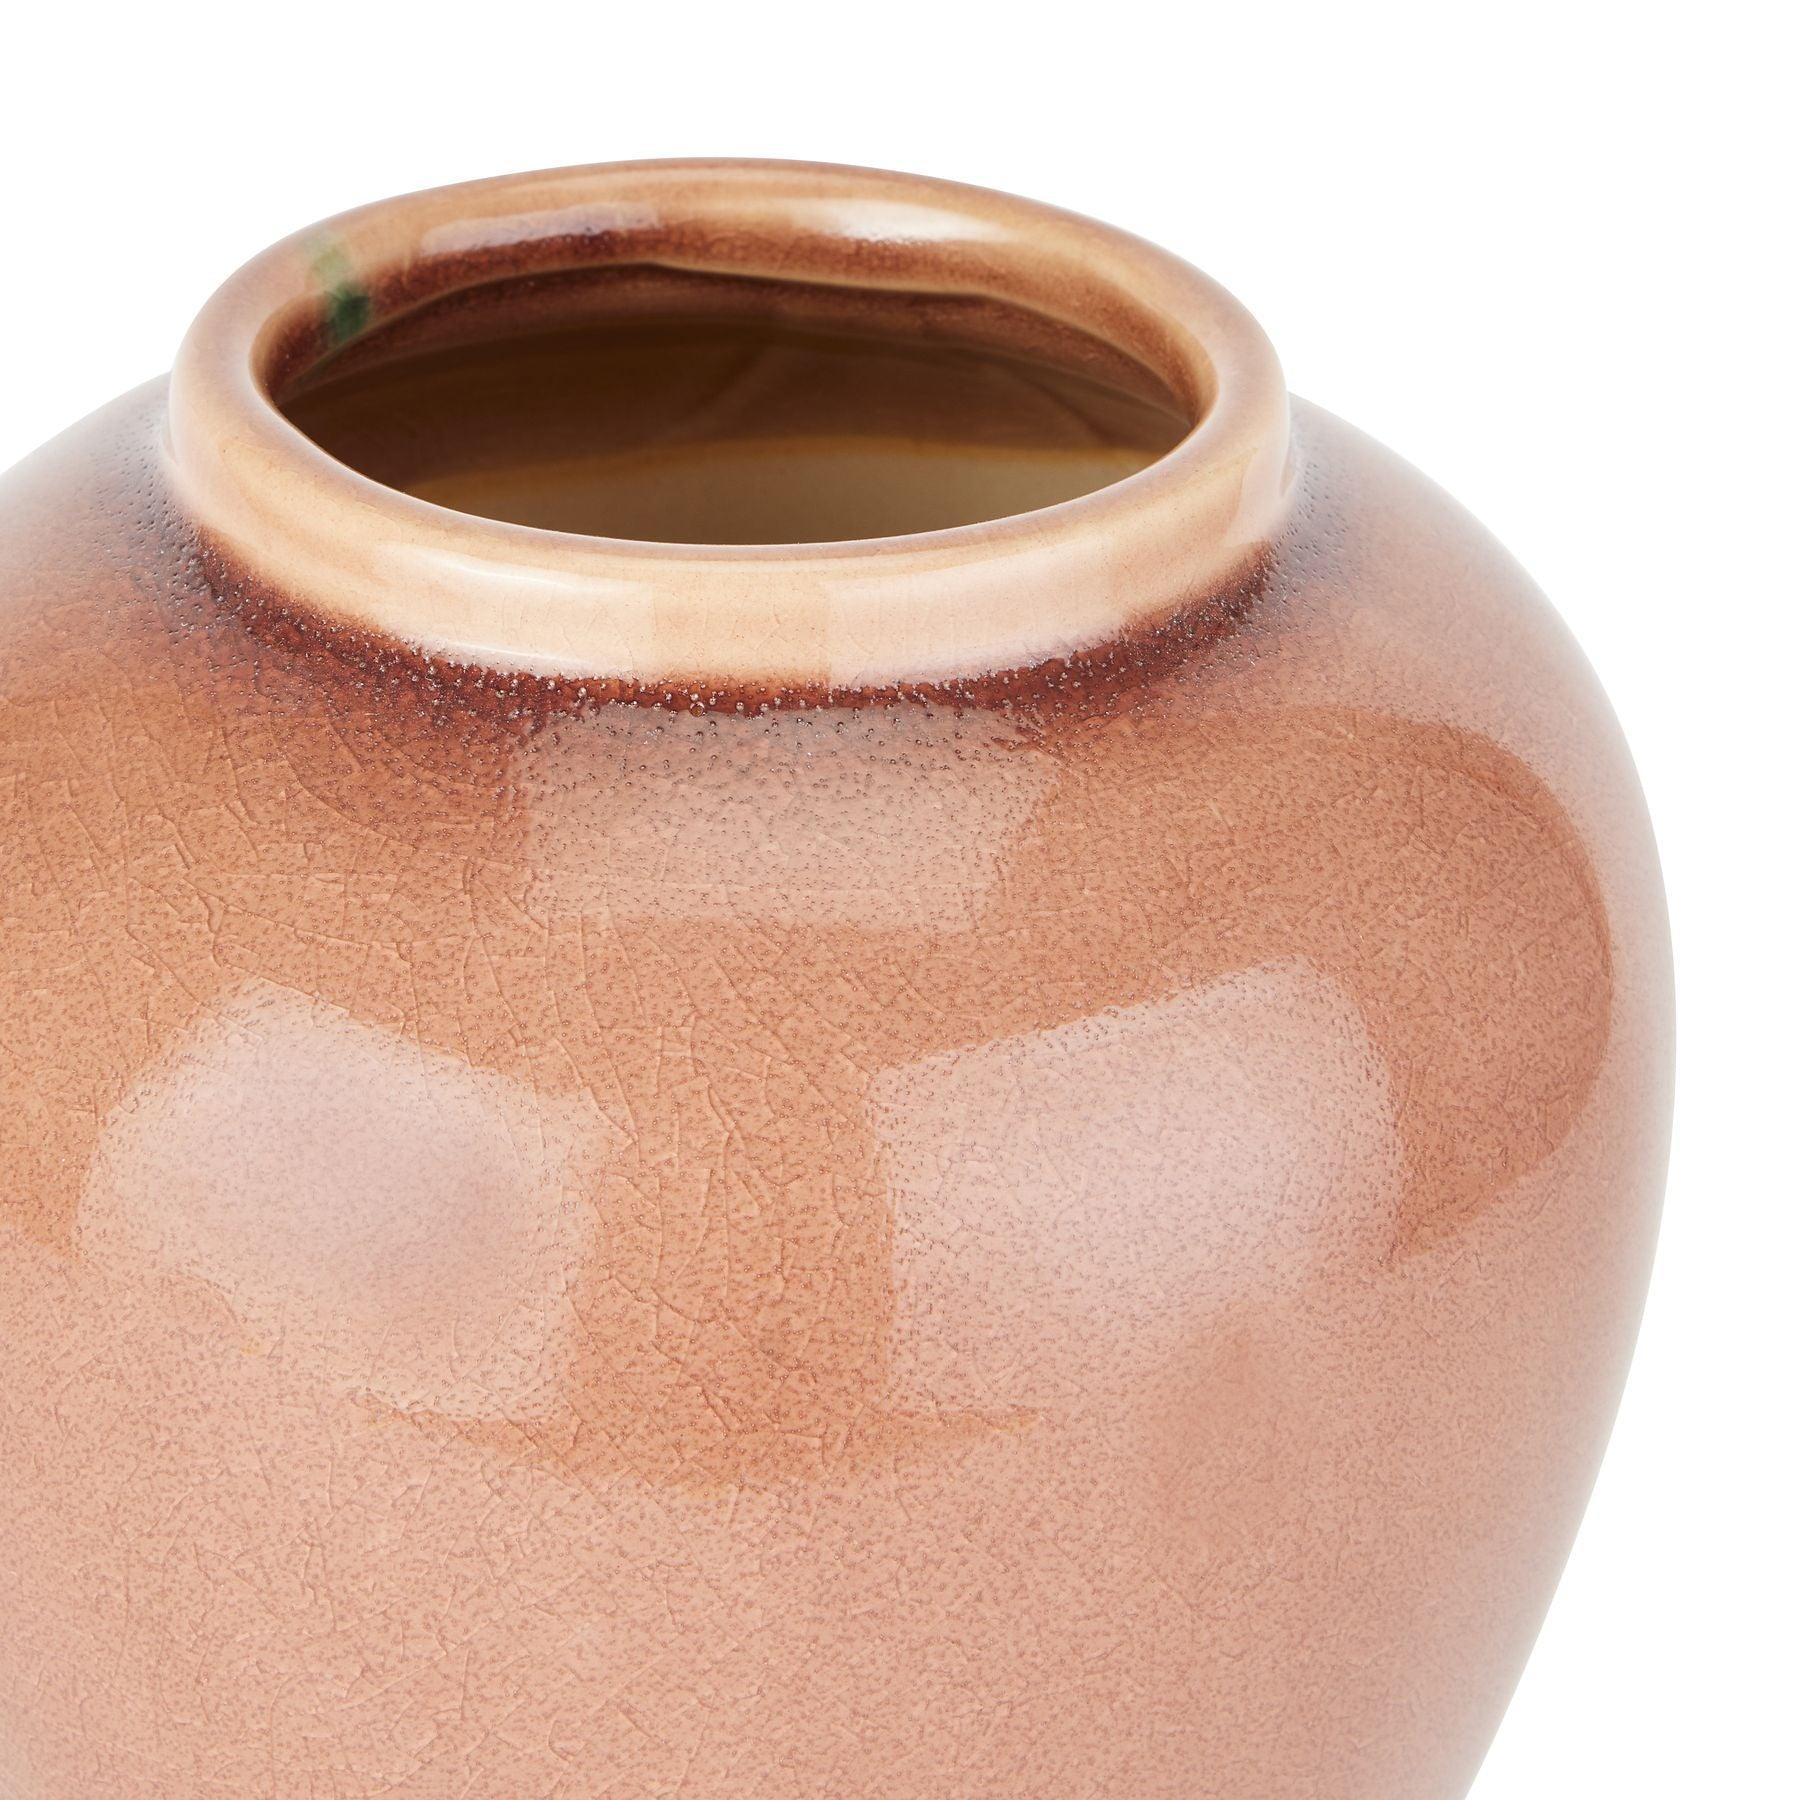 Seville Collection Blush Ginger Jar-Gifts & Accessories > Ornaments